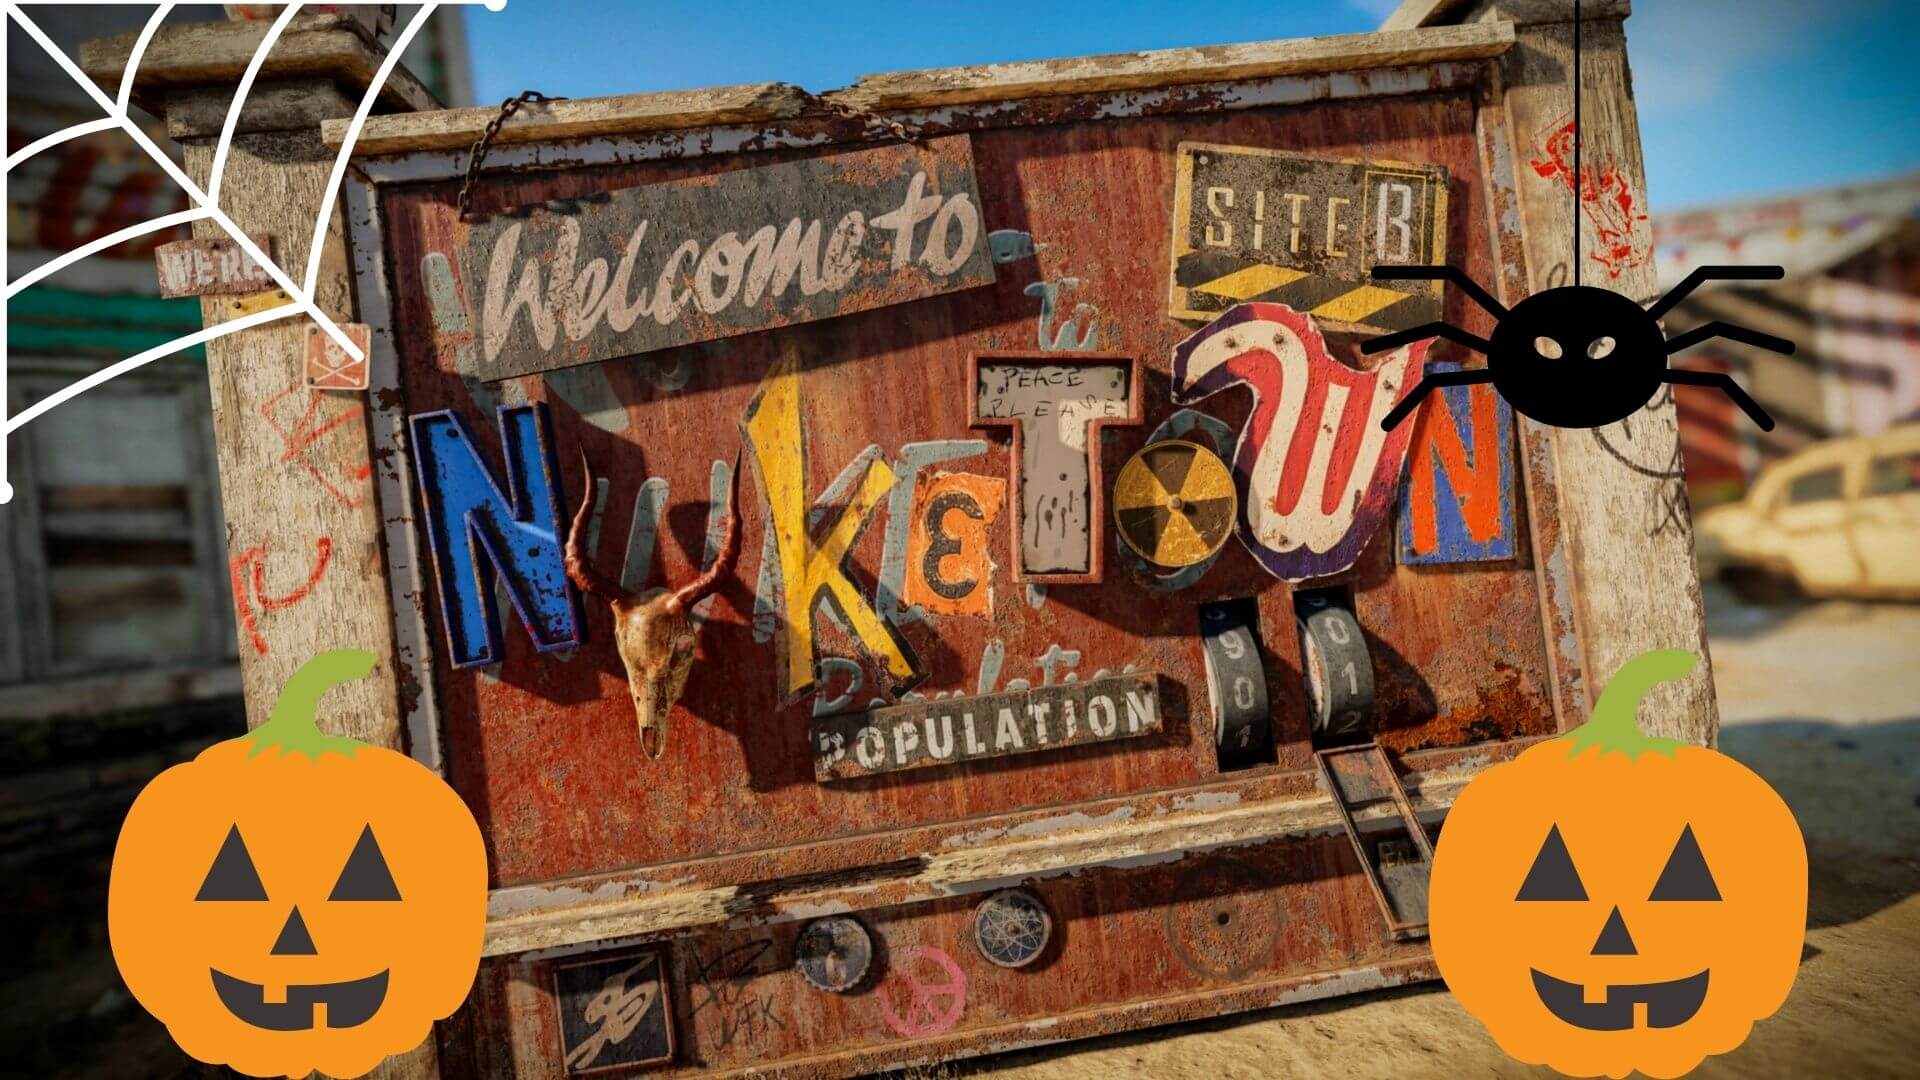 nuketown 84 sign in cold war